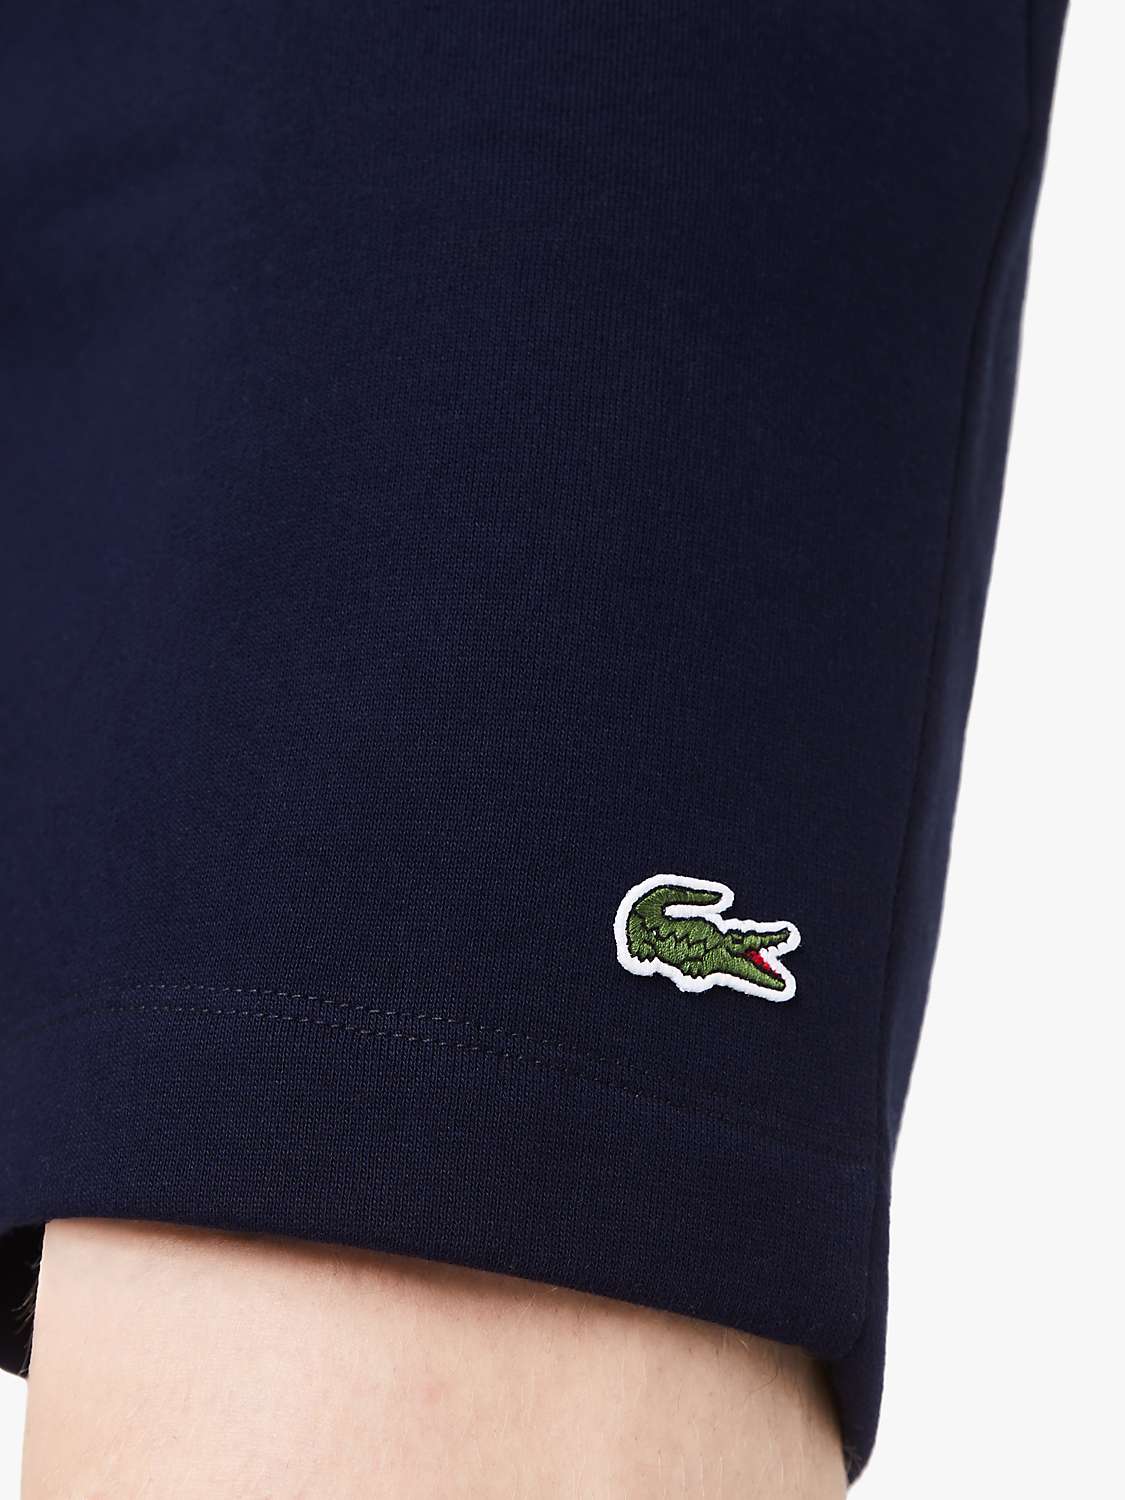 Buy Lacoste Classic Logo Jogger Sweat Shorts, 166 Online at johnlewis.com